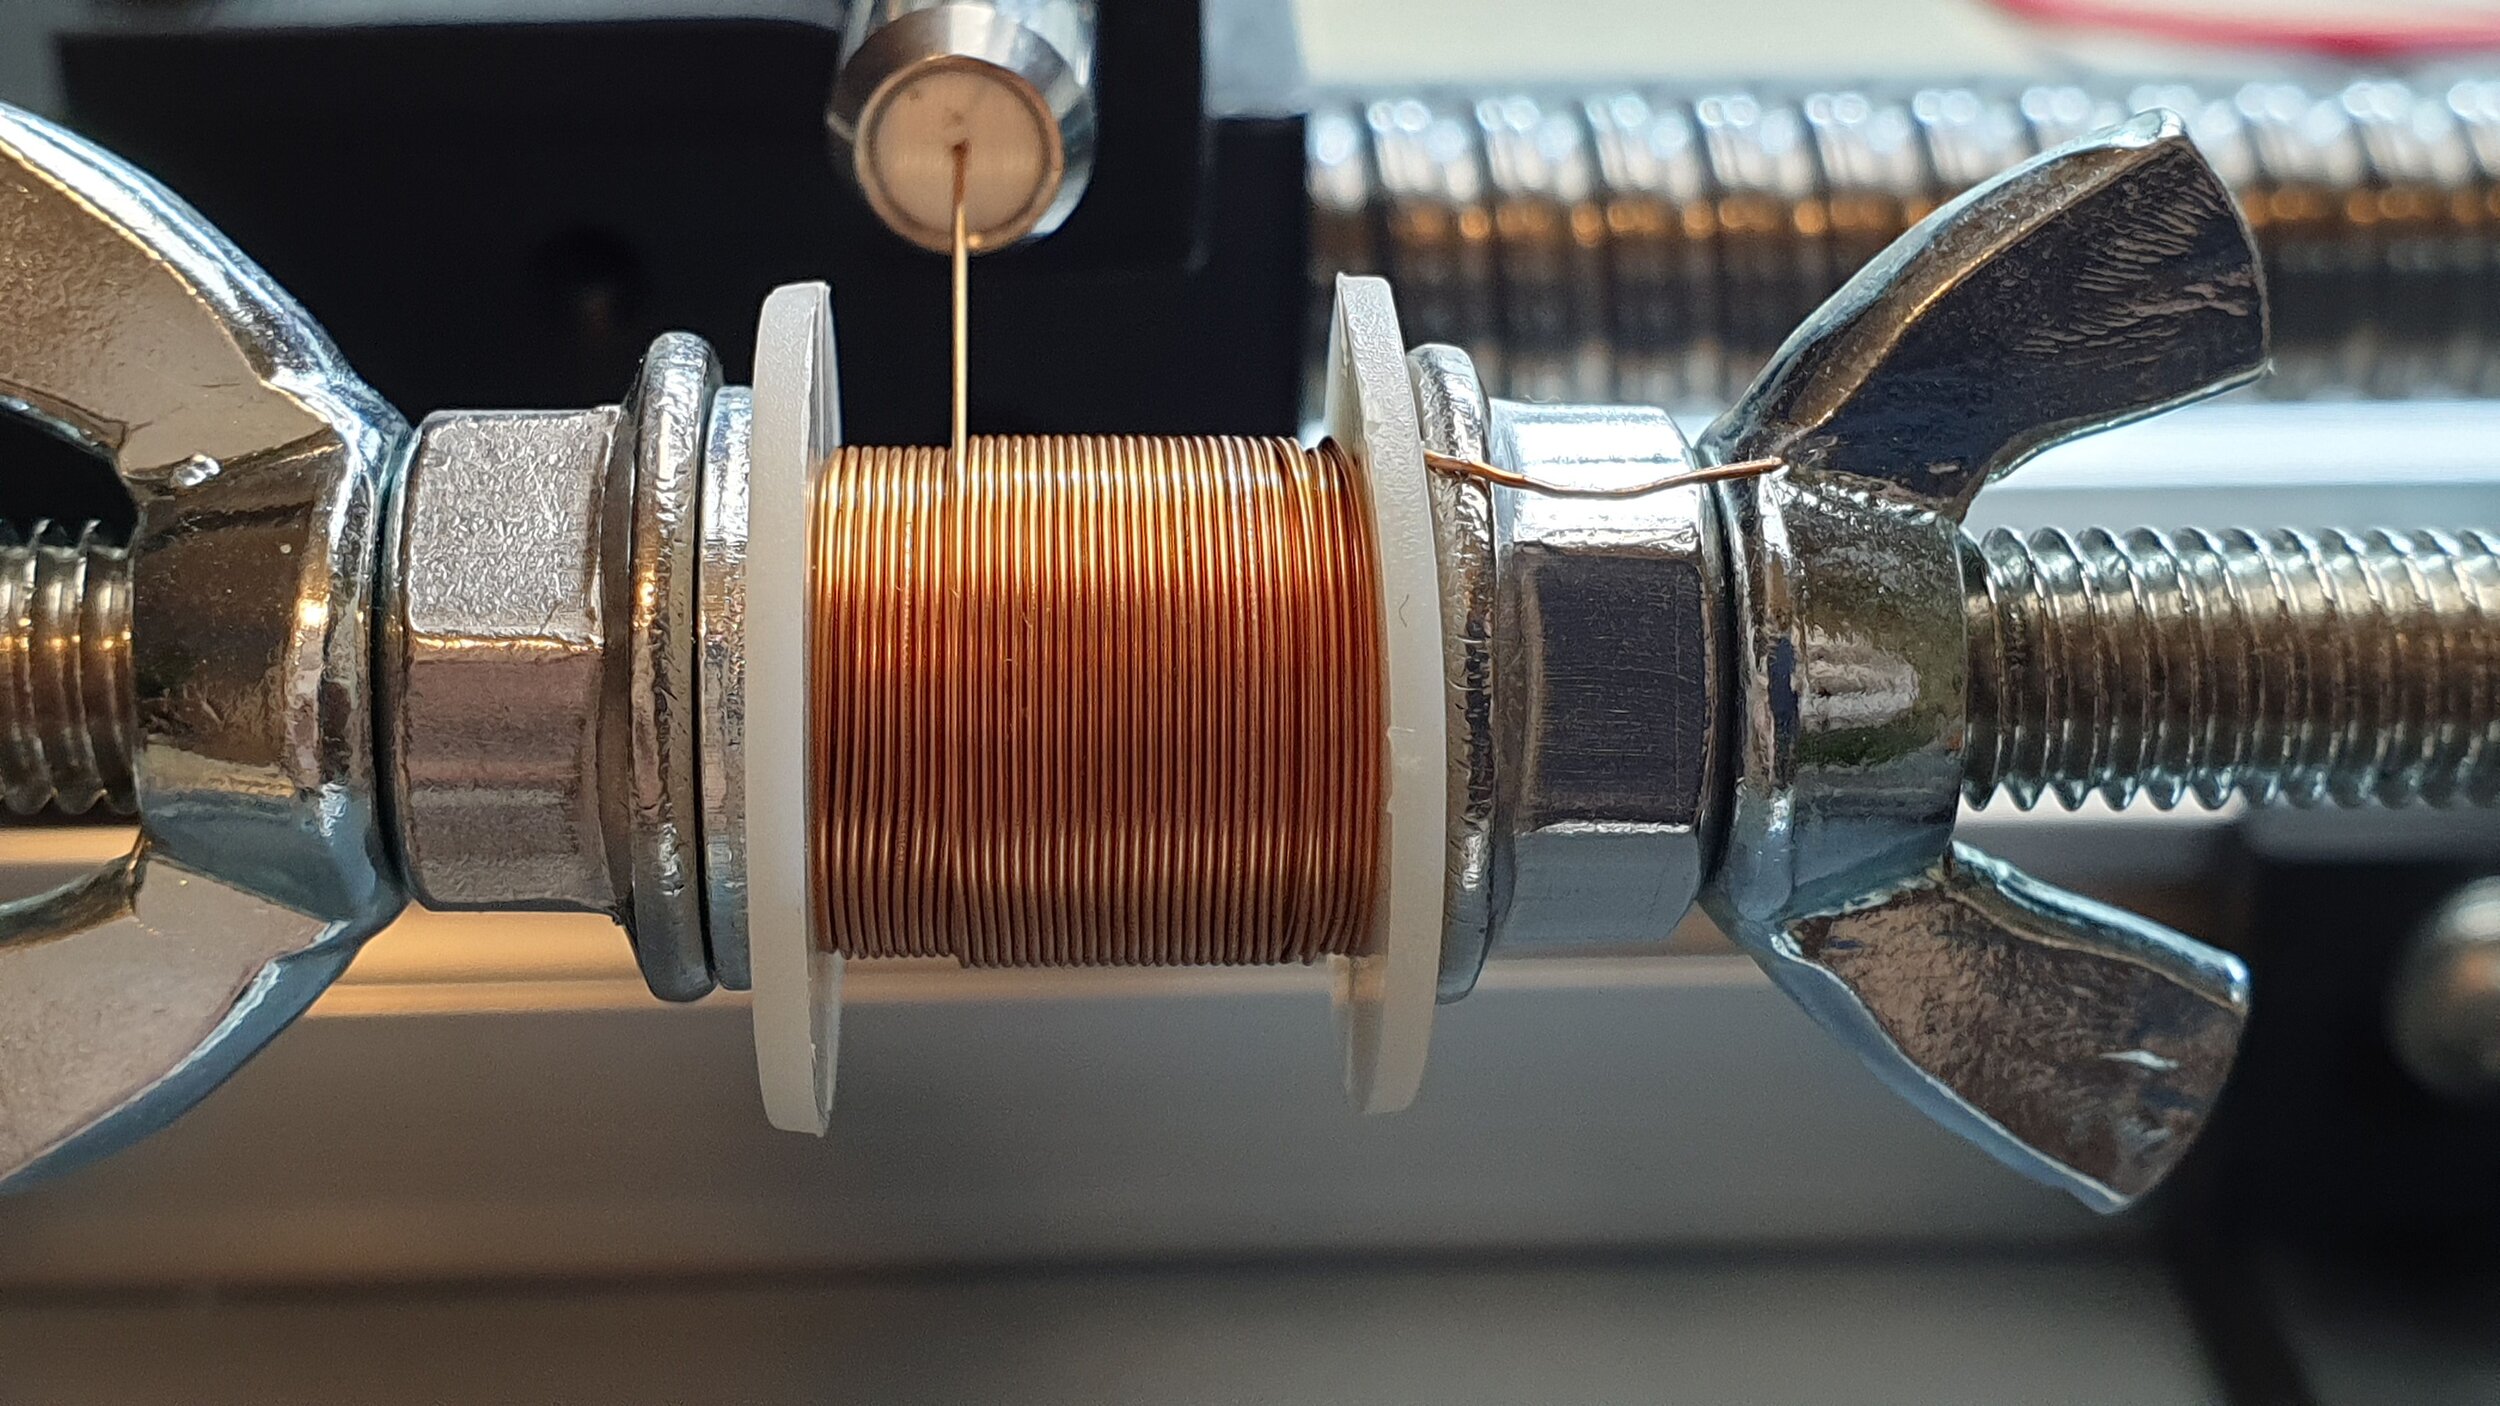 An almost perfect 3-layer coil